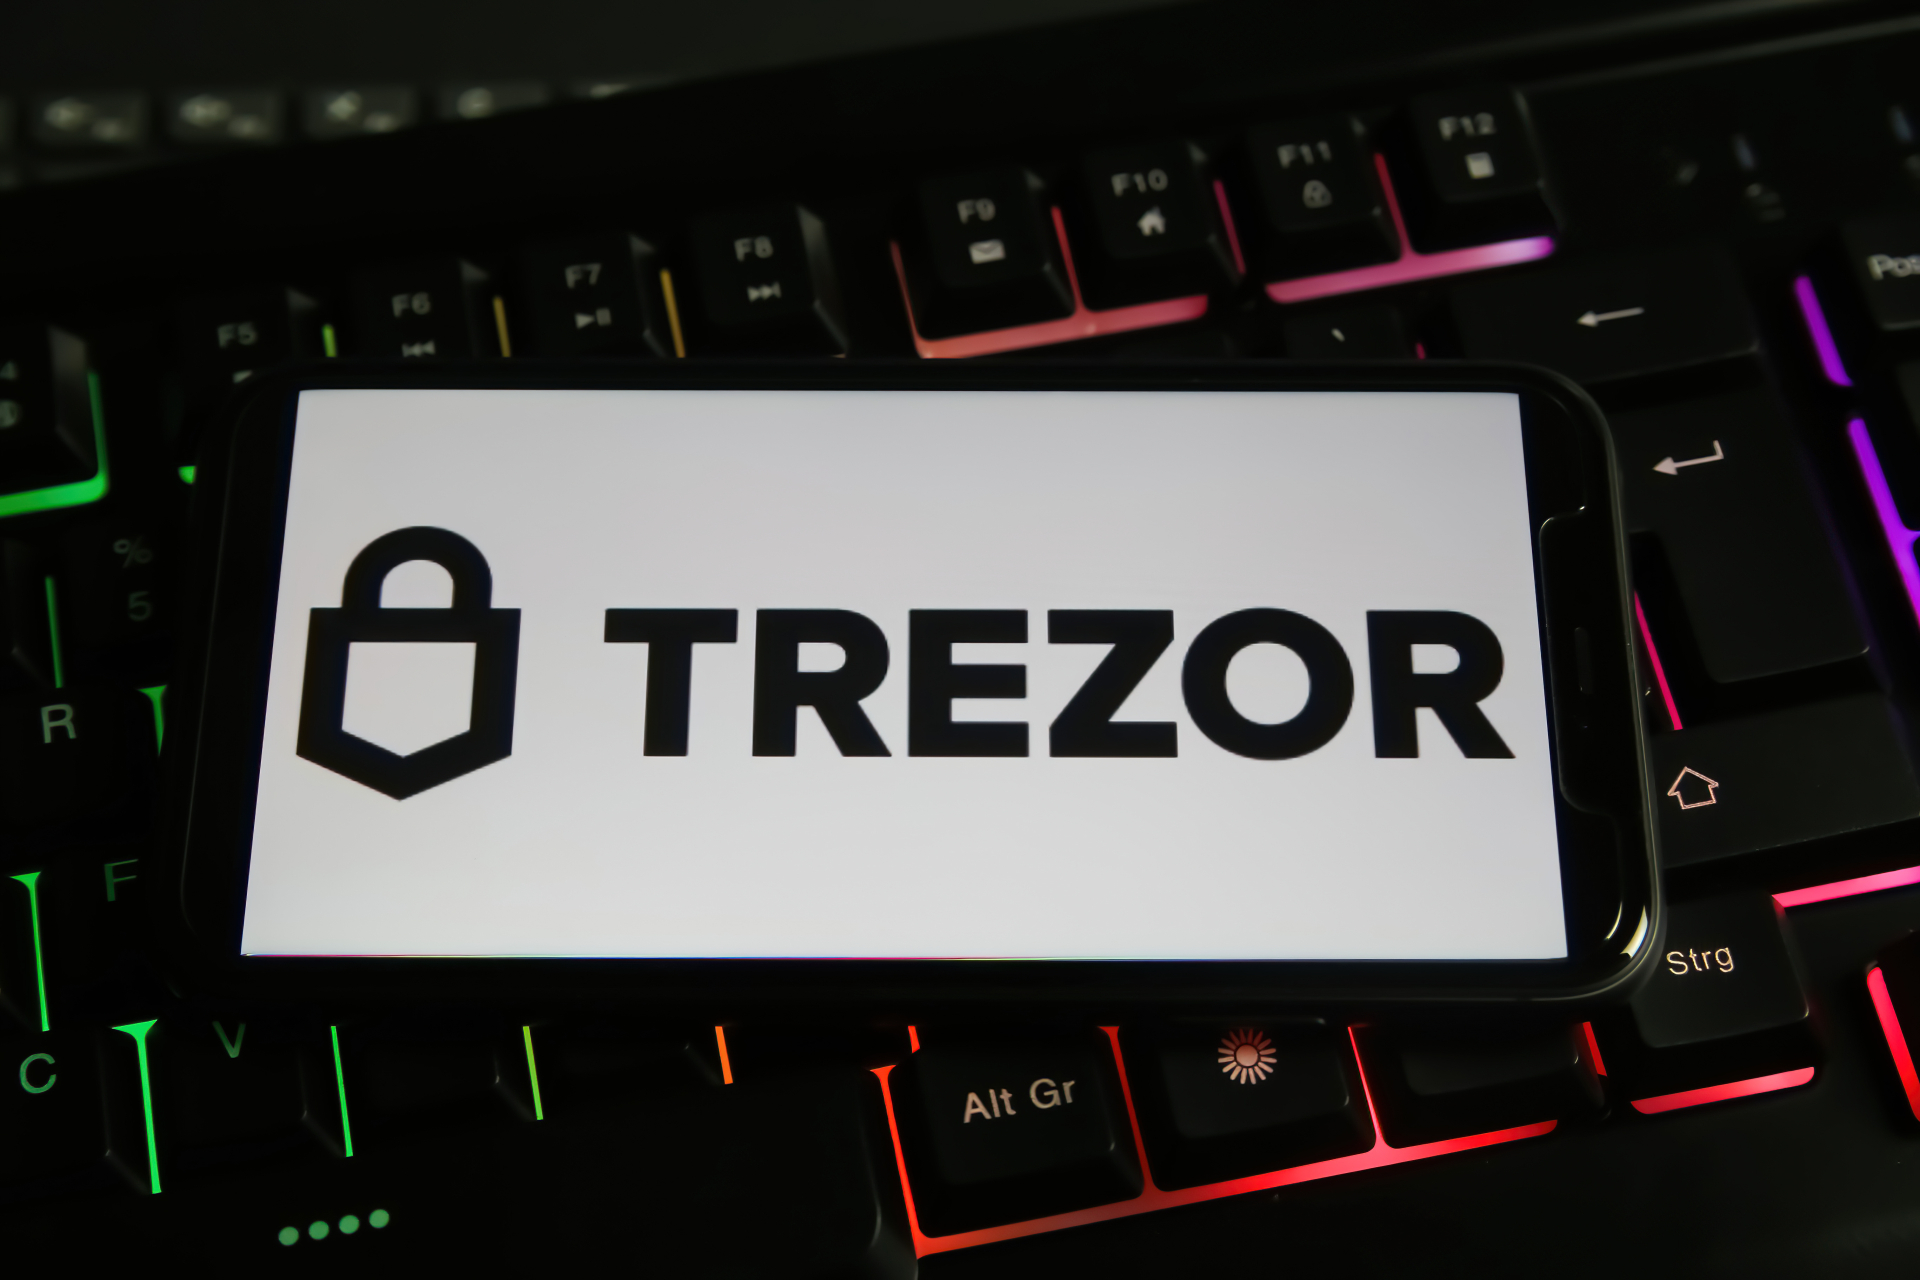 Trezor will produce its own chips for hardware wallets
